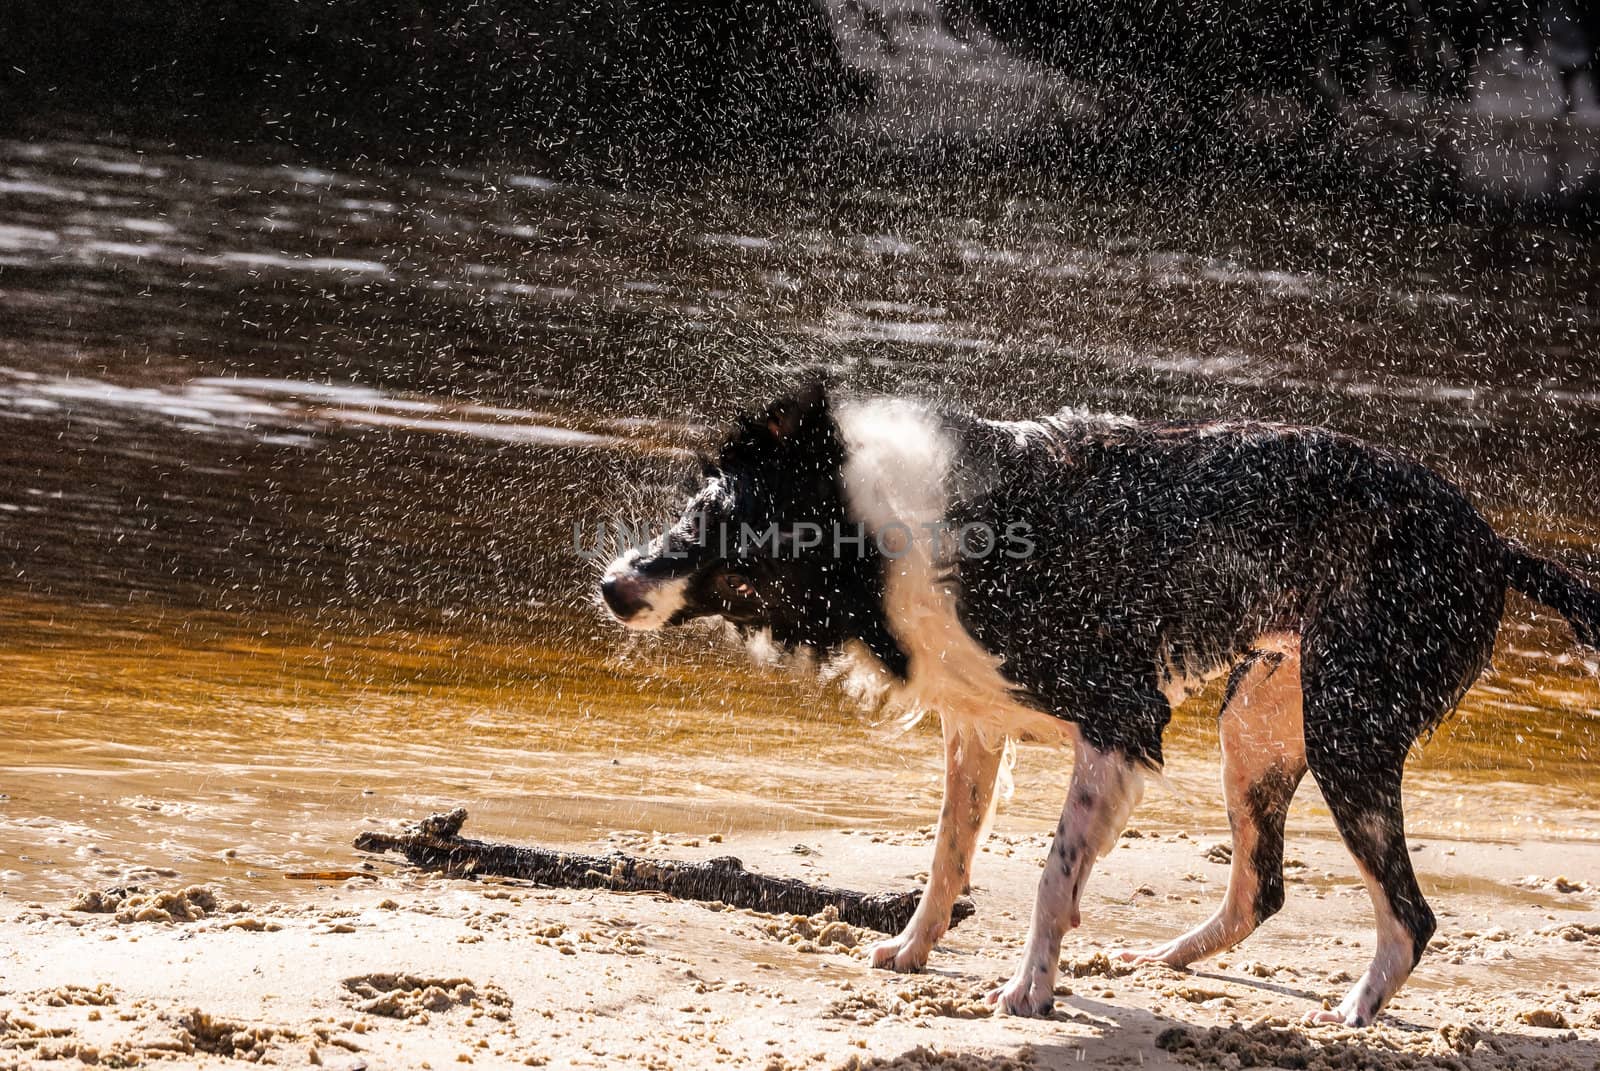 Photograph of a Border Collie who was recently in the river water on the river bank shaking off water.  Fast shutter speed freezes water droplets in air.